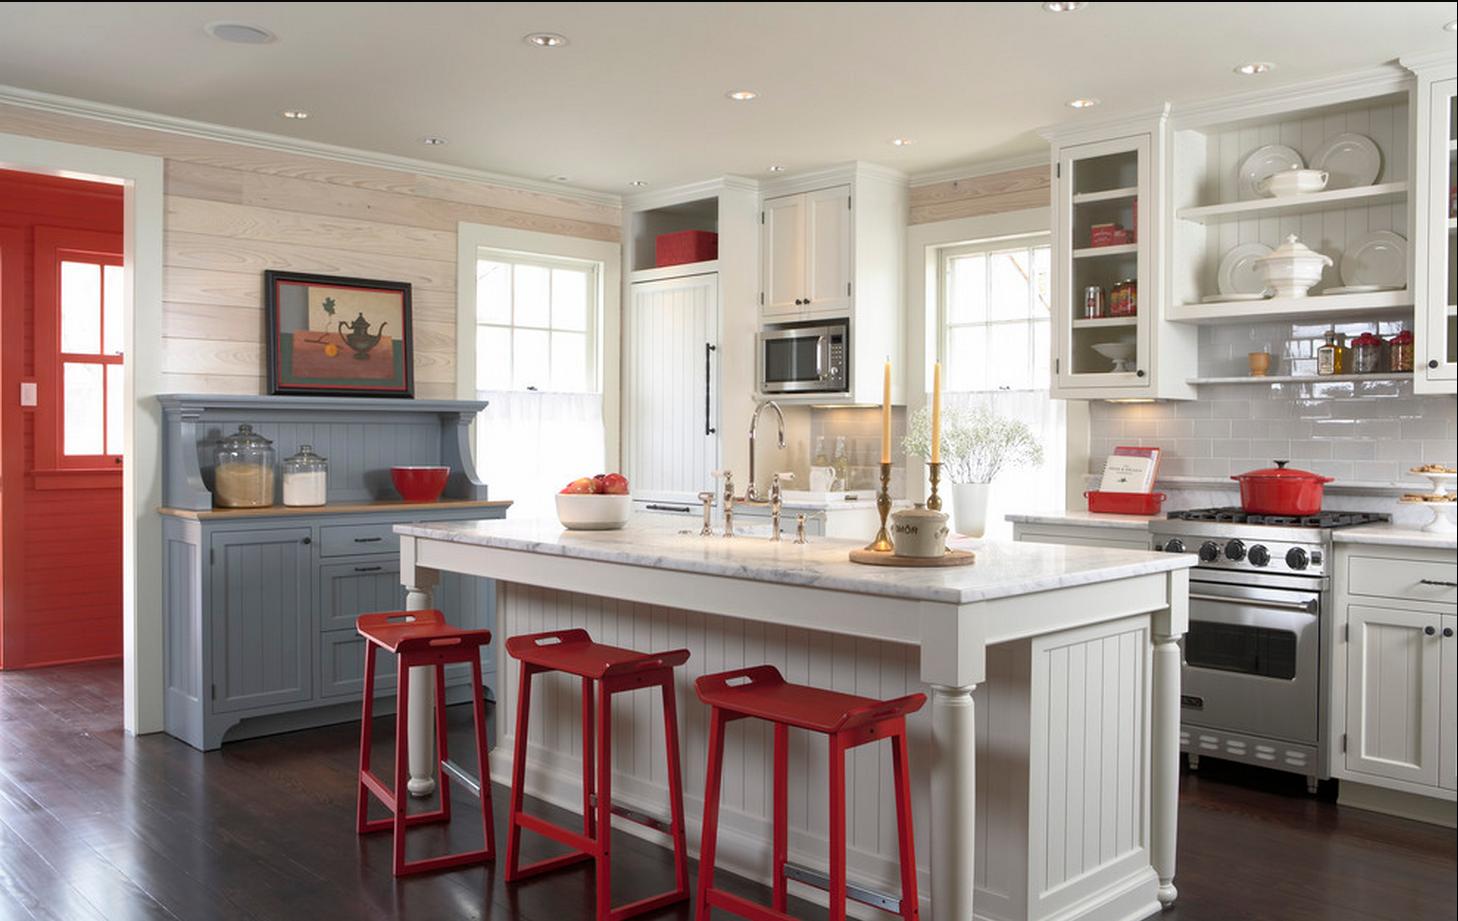 Delorme Designs: RED WHITE AND BLUE KITCHEN & WHAT NOT TA!!